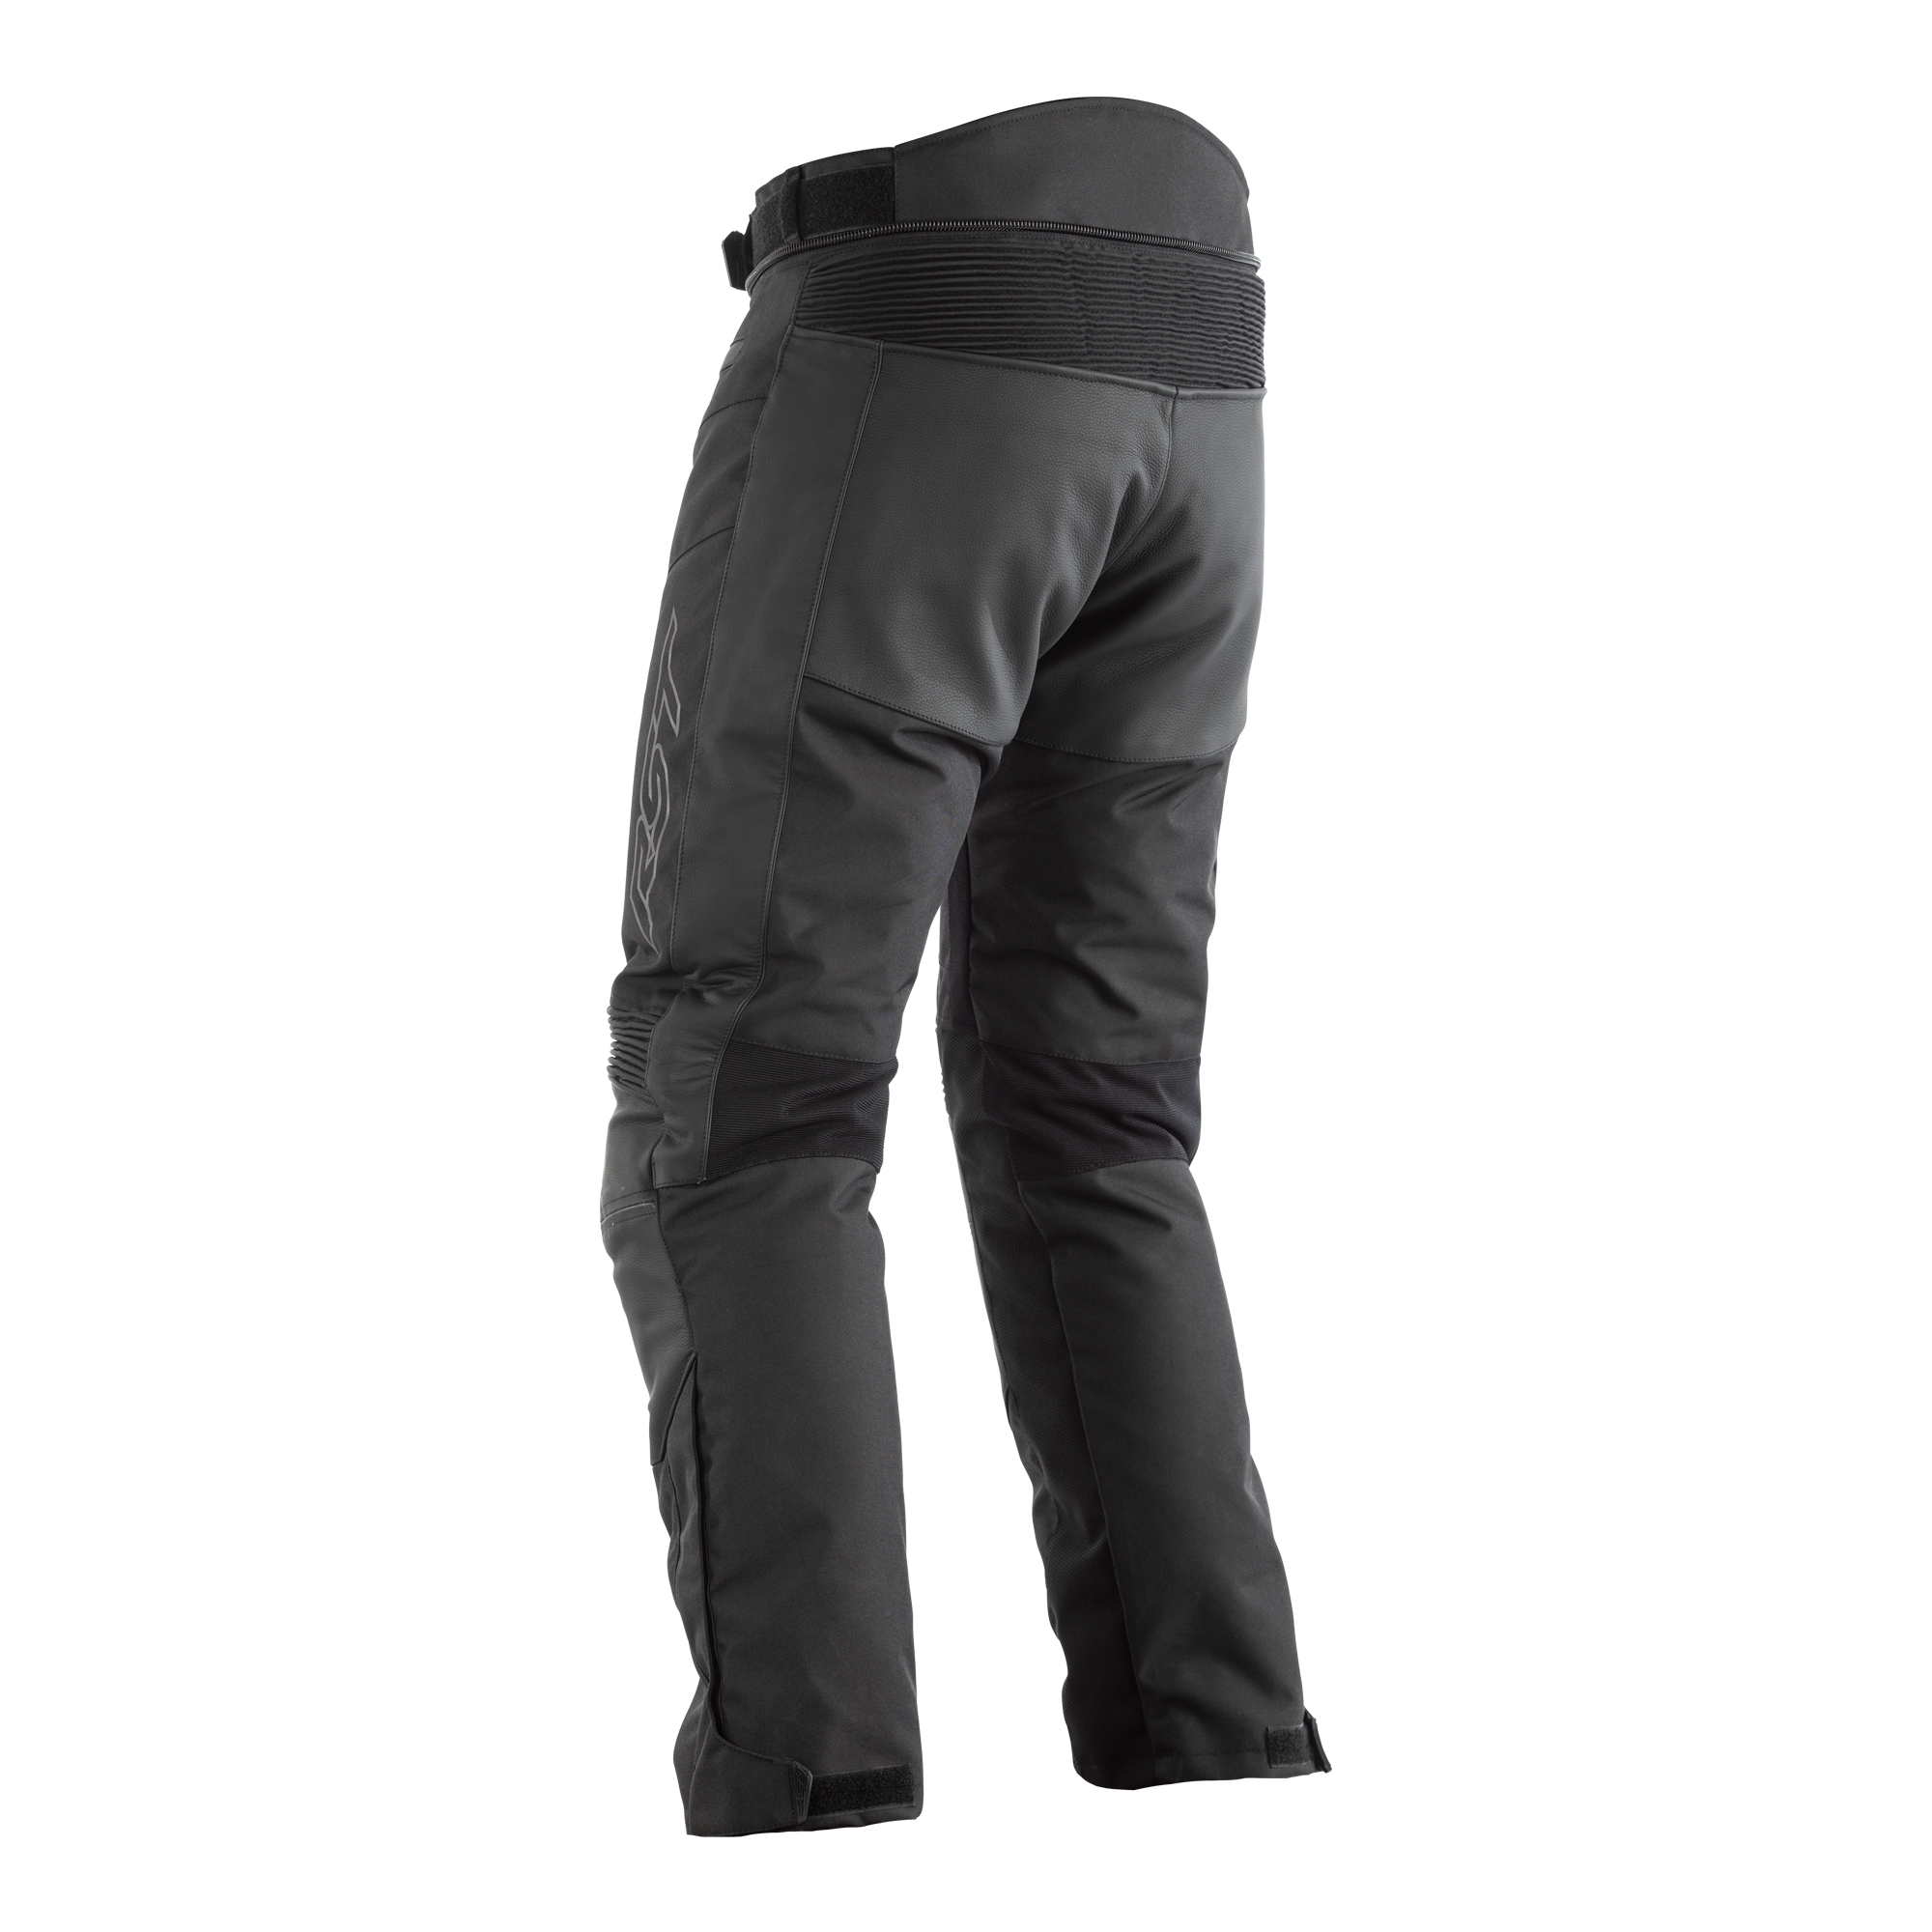 RST Syncro Plus CE Textile Trousers - Black | RST Motorcycle Clothing ...